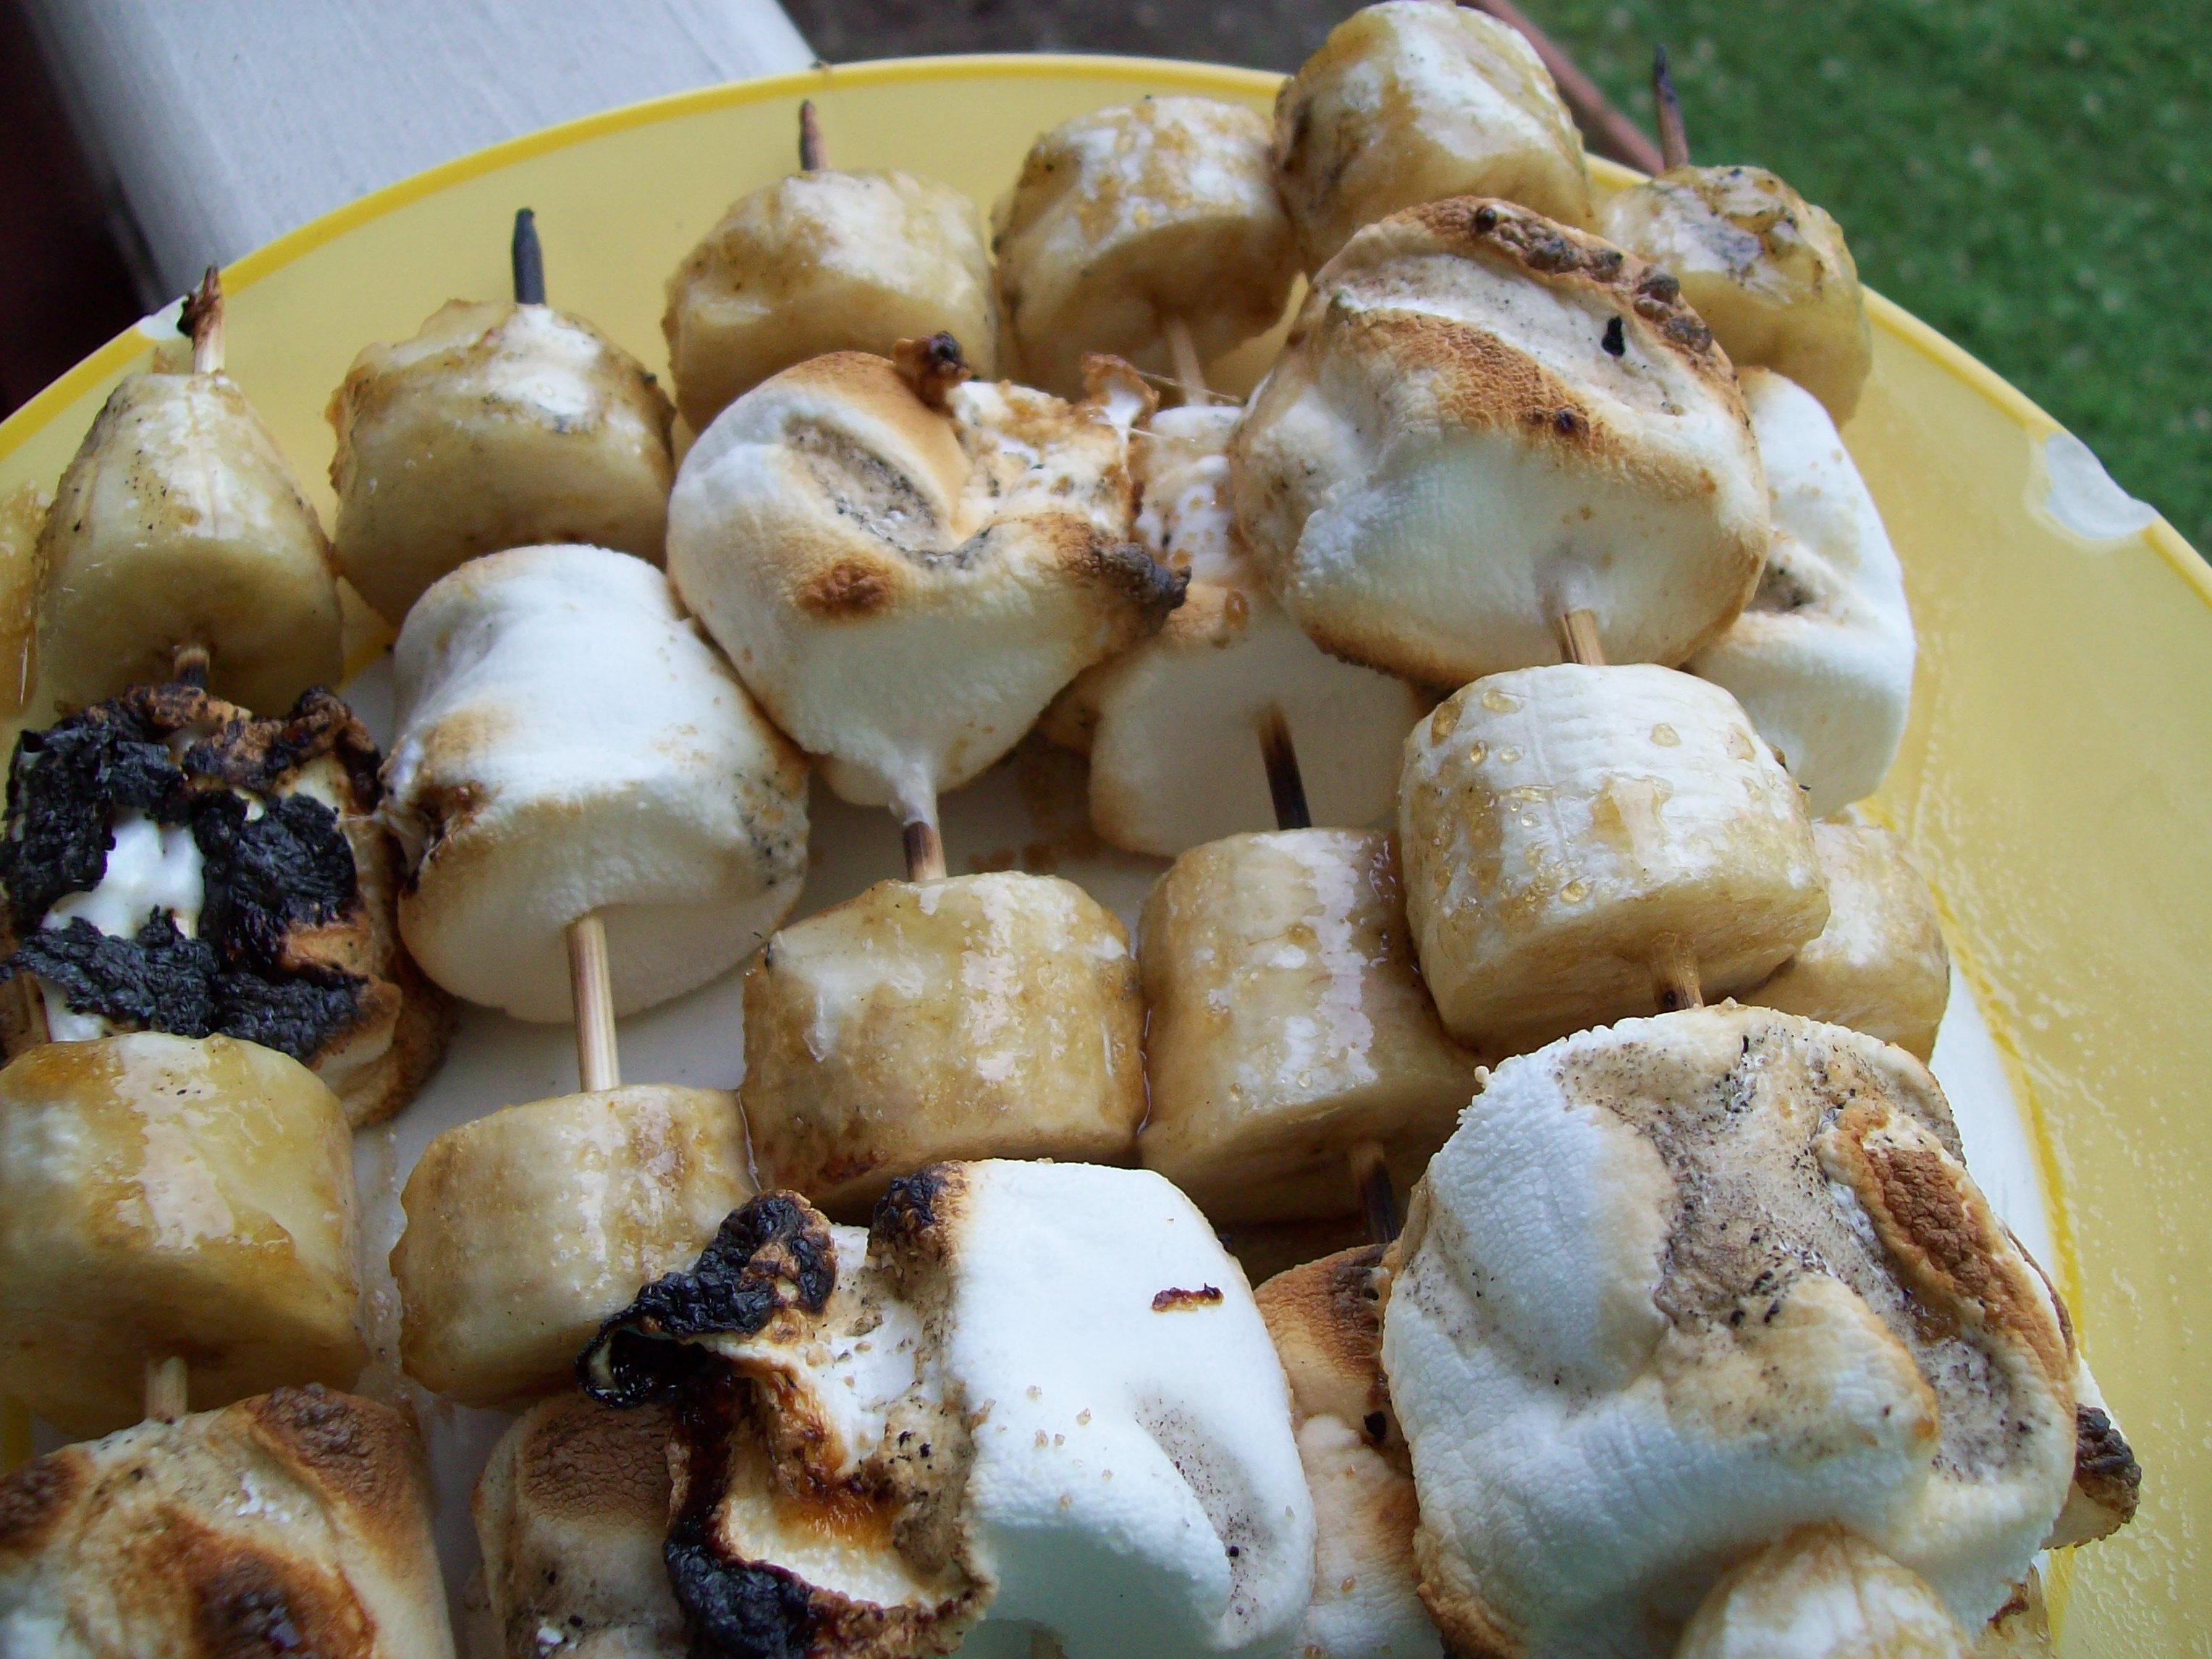 Caramelized Banana and Toasted Marshmallow Skewers